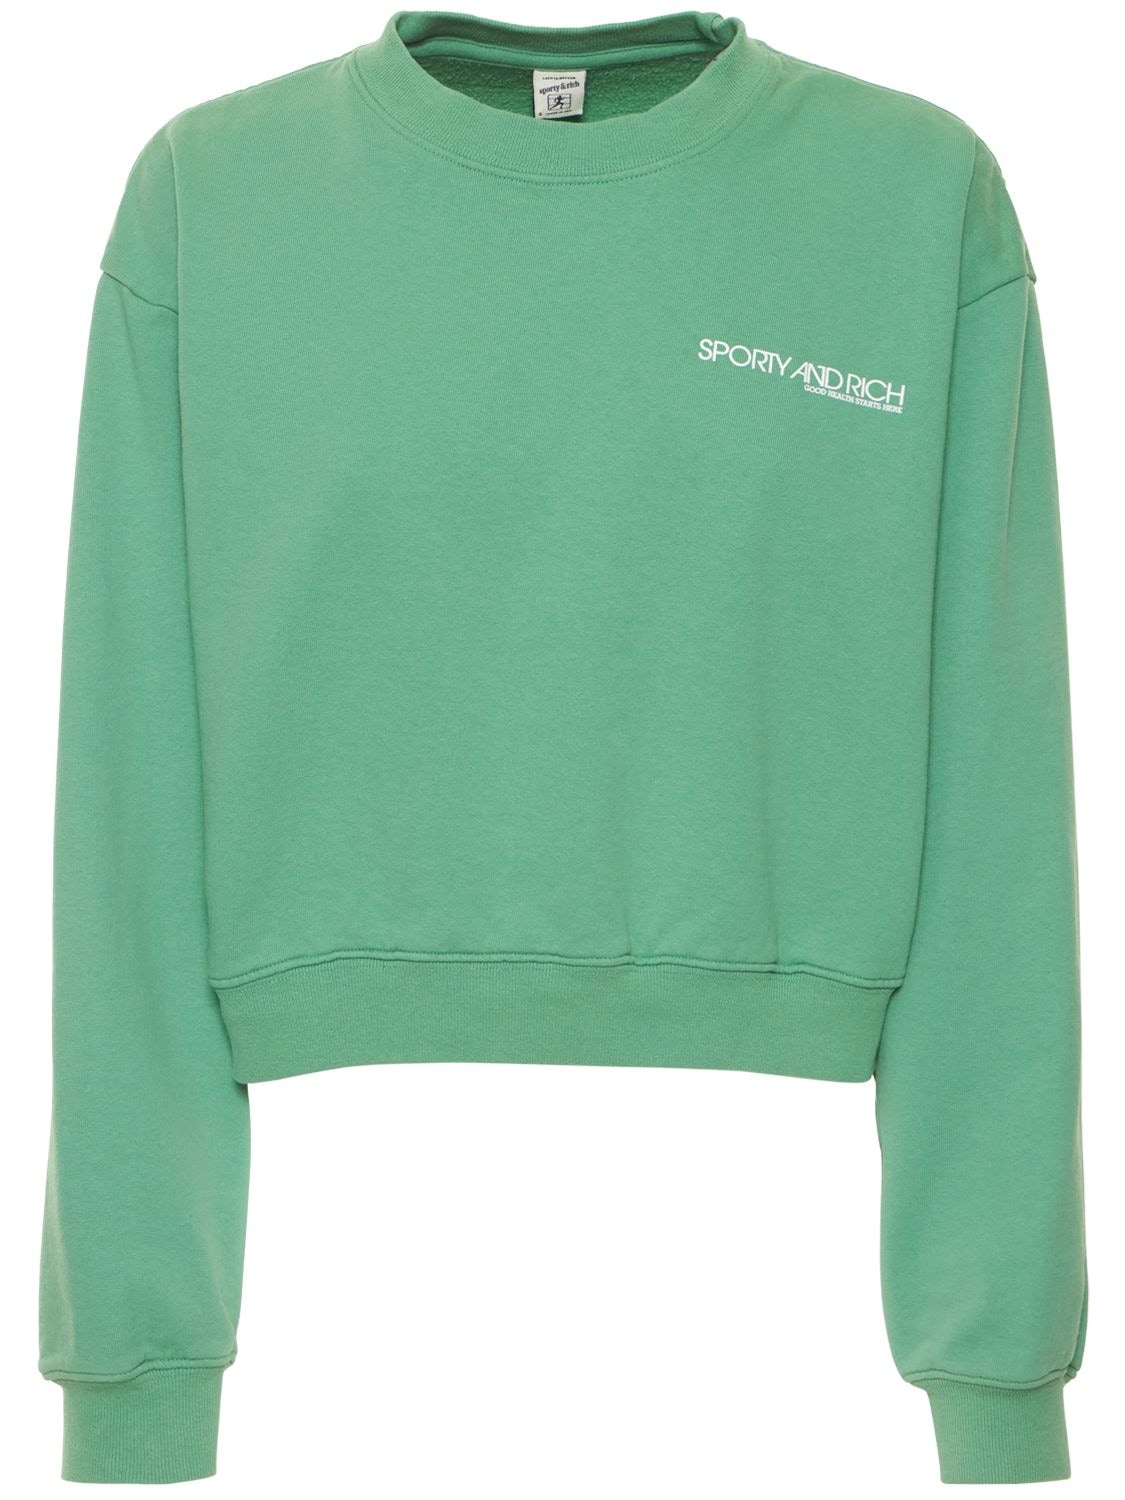 SPORTY AND RICH DISCO CROPPED CREWNECK SWEATSHIRT